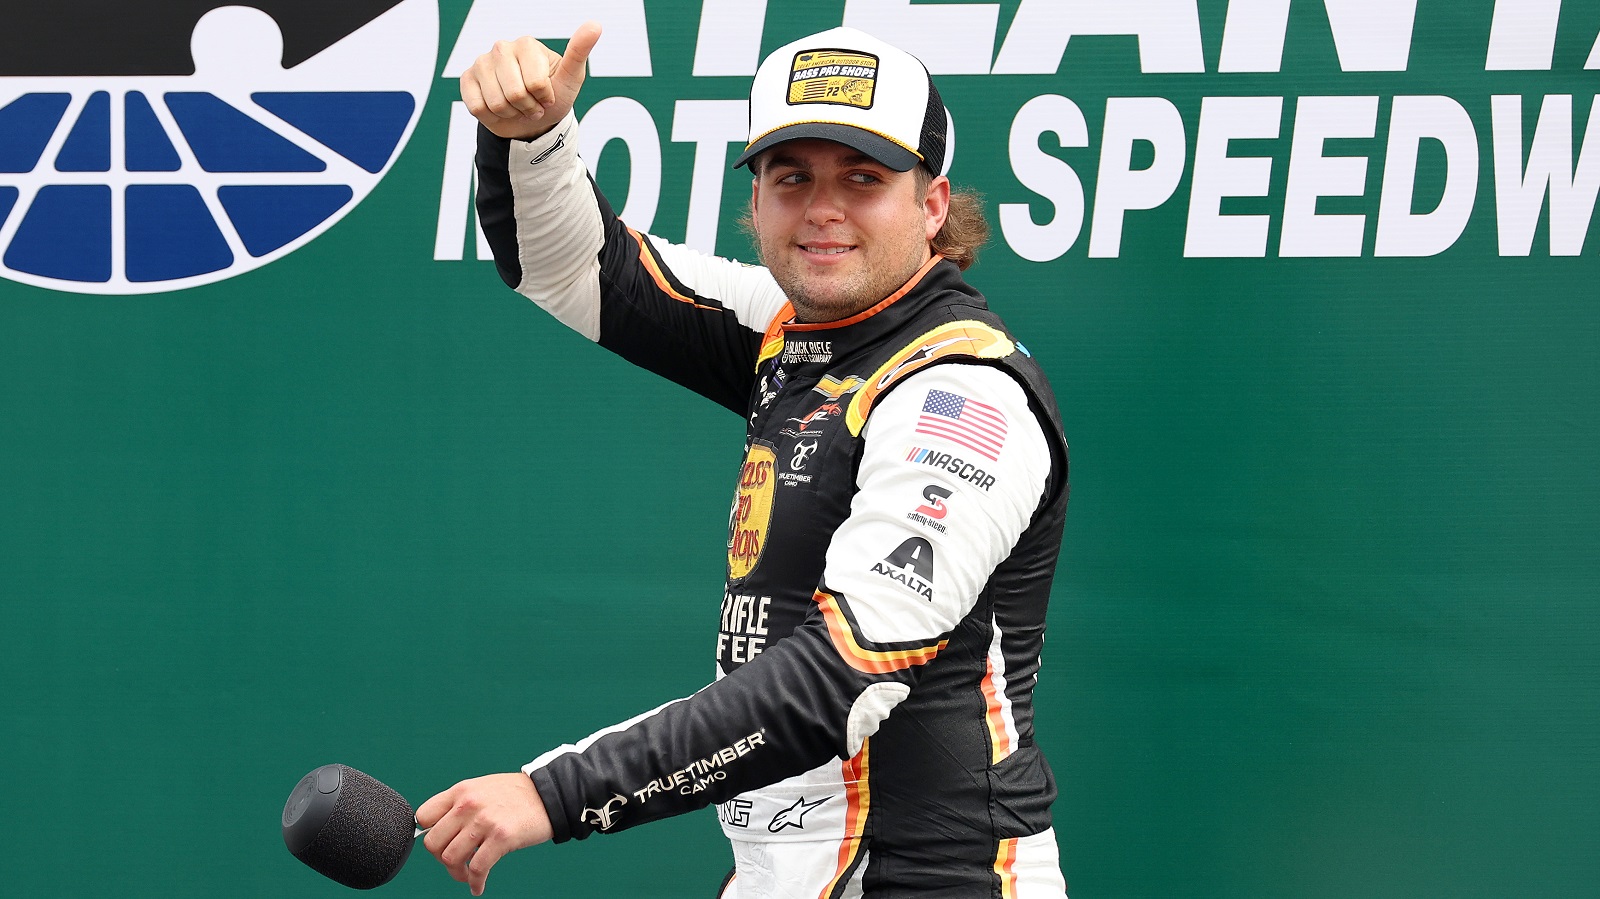 Noah Gragson waves to fans as he walks onstage during driver intros prior to the NASCAR Xfinity Series Alsco Uniforms 250 at Atlanta Motor Speedway on July 9, 2022.